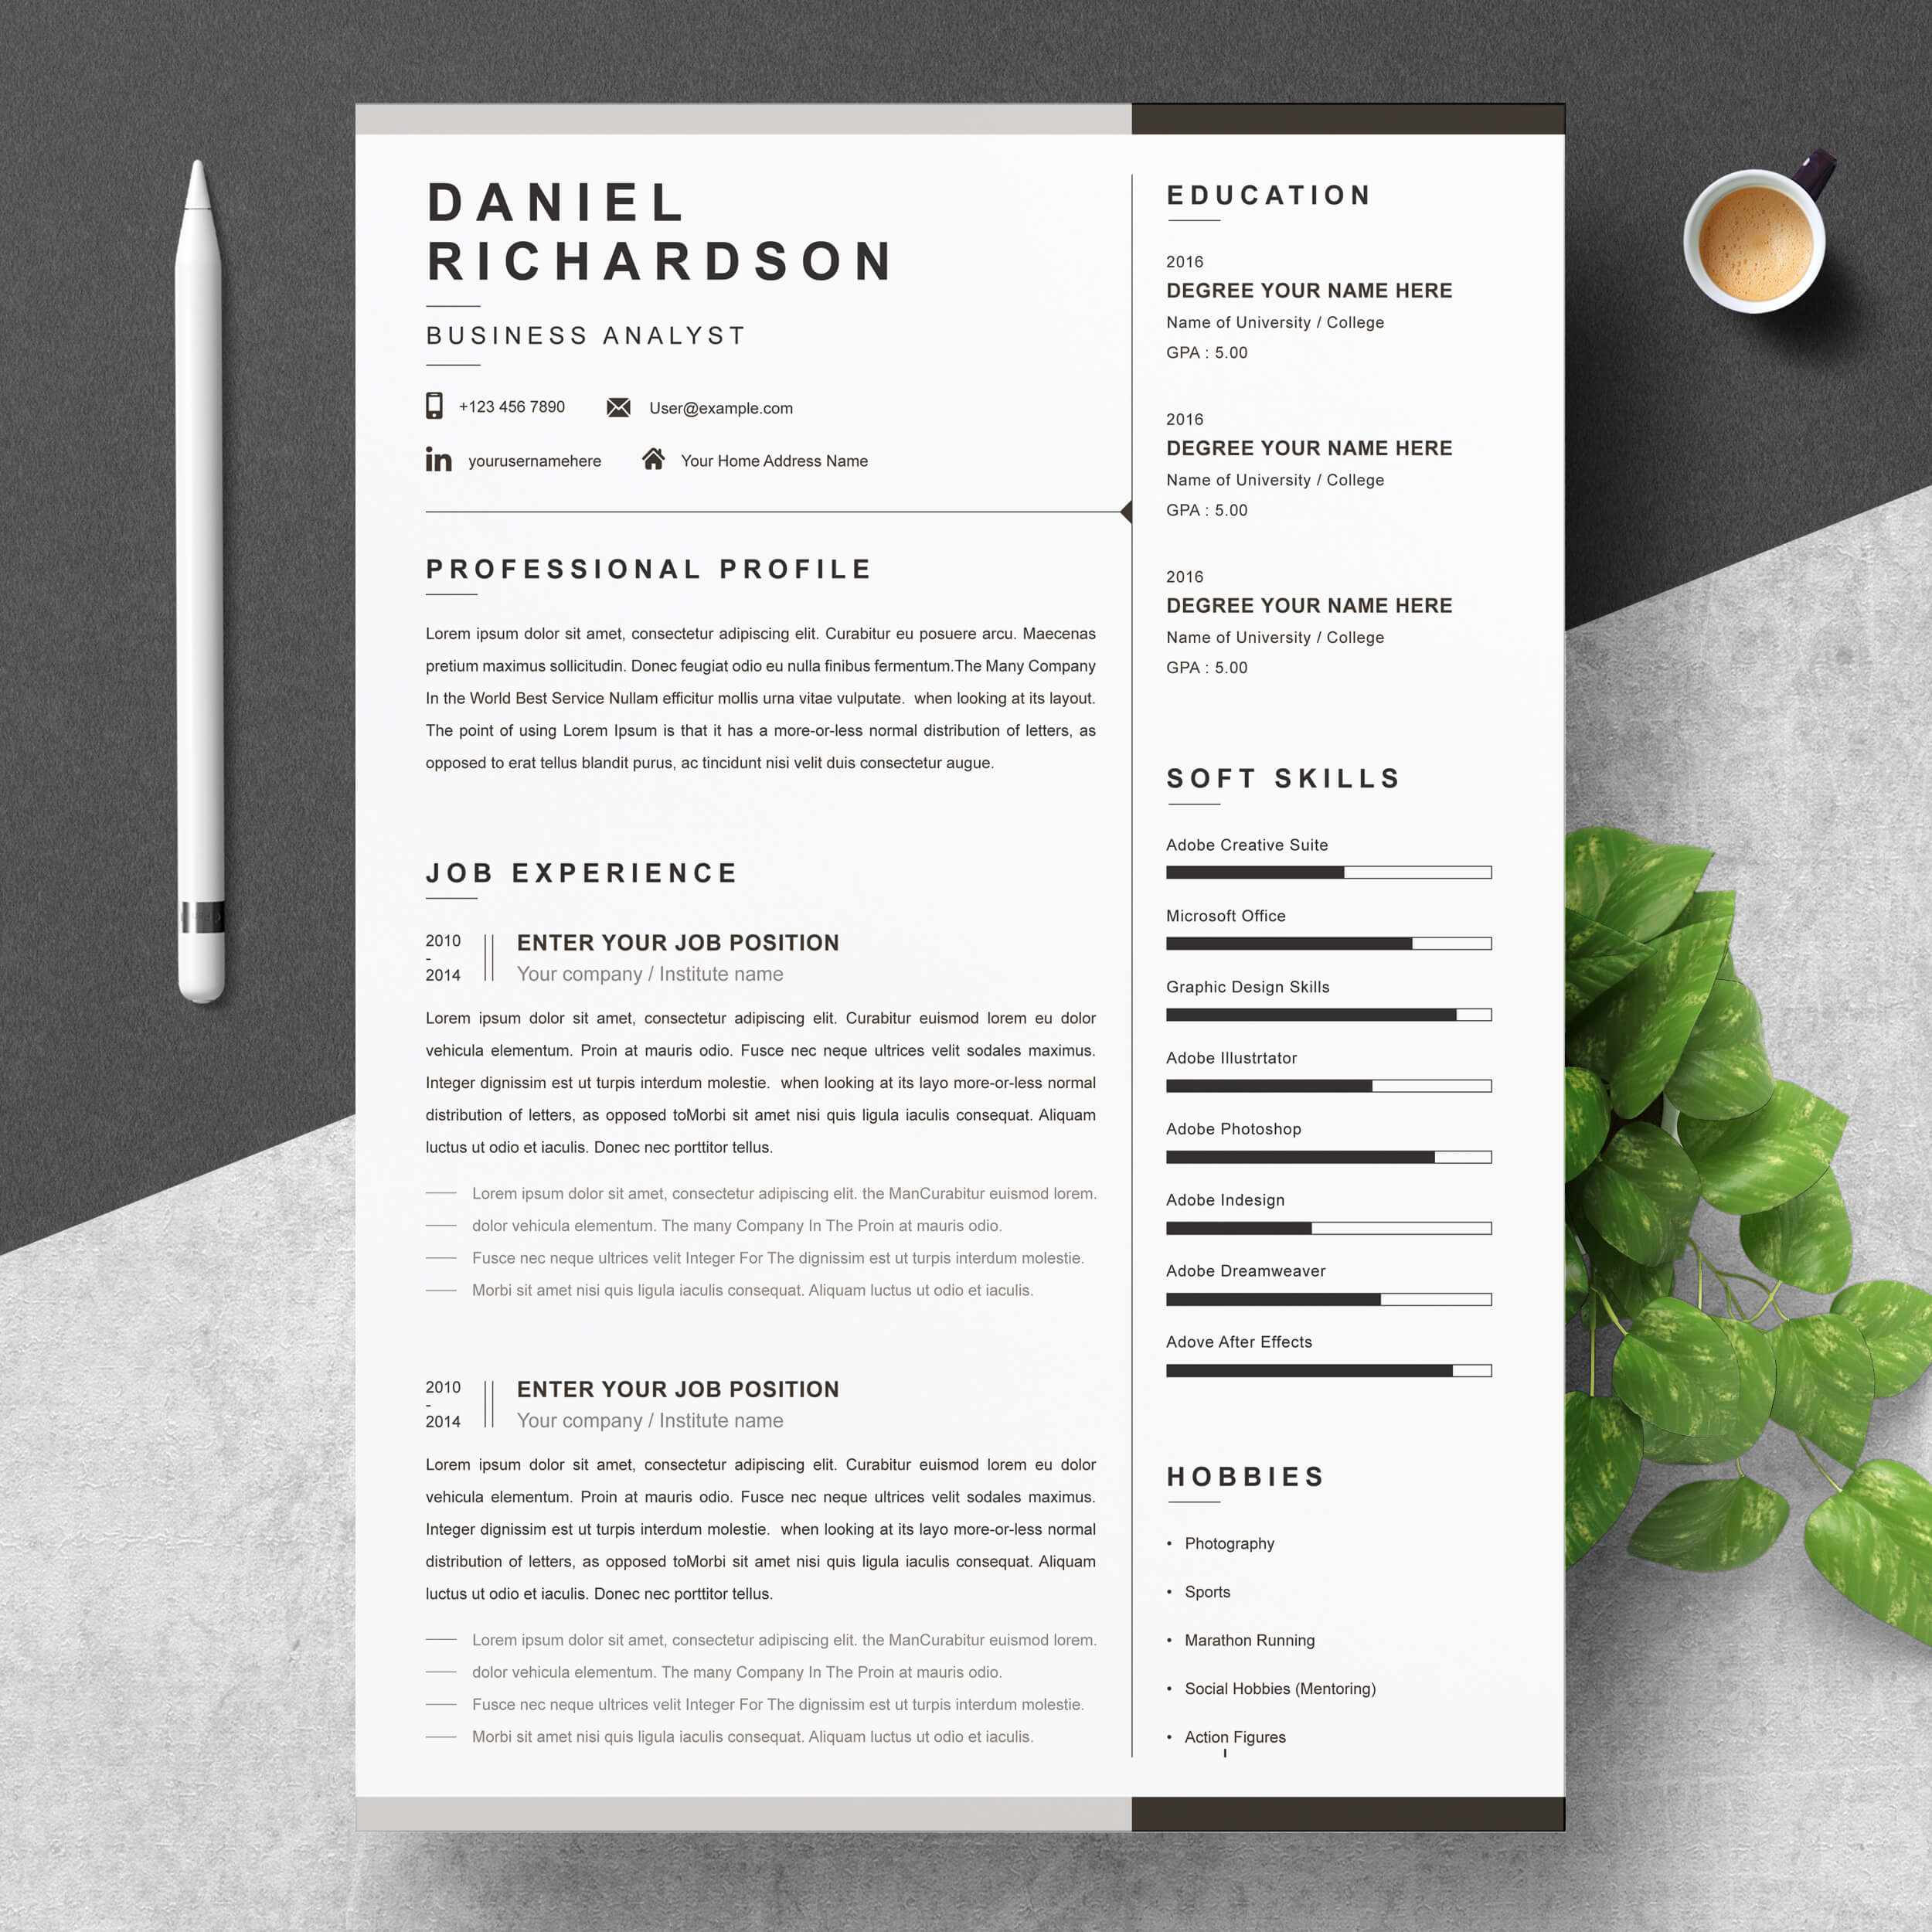 Business Analyst Resume Design Template | Modern Word Resume Template cover image.